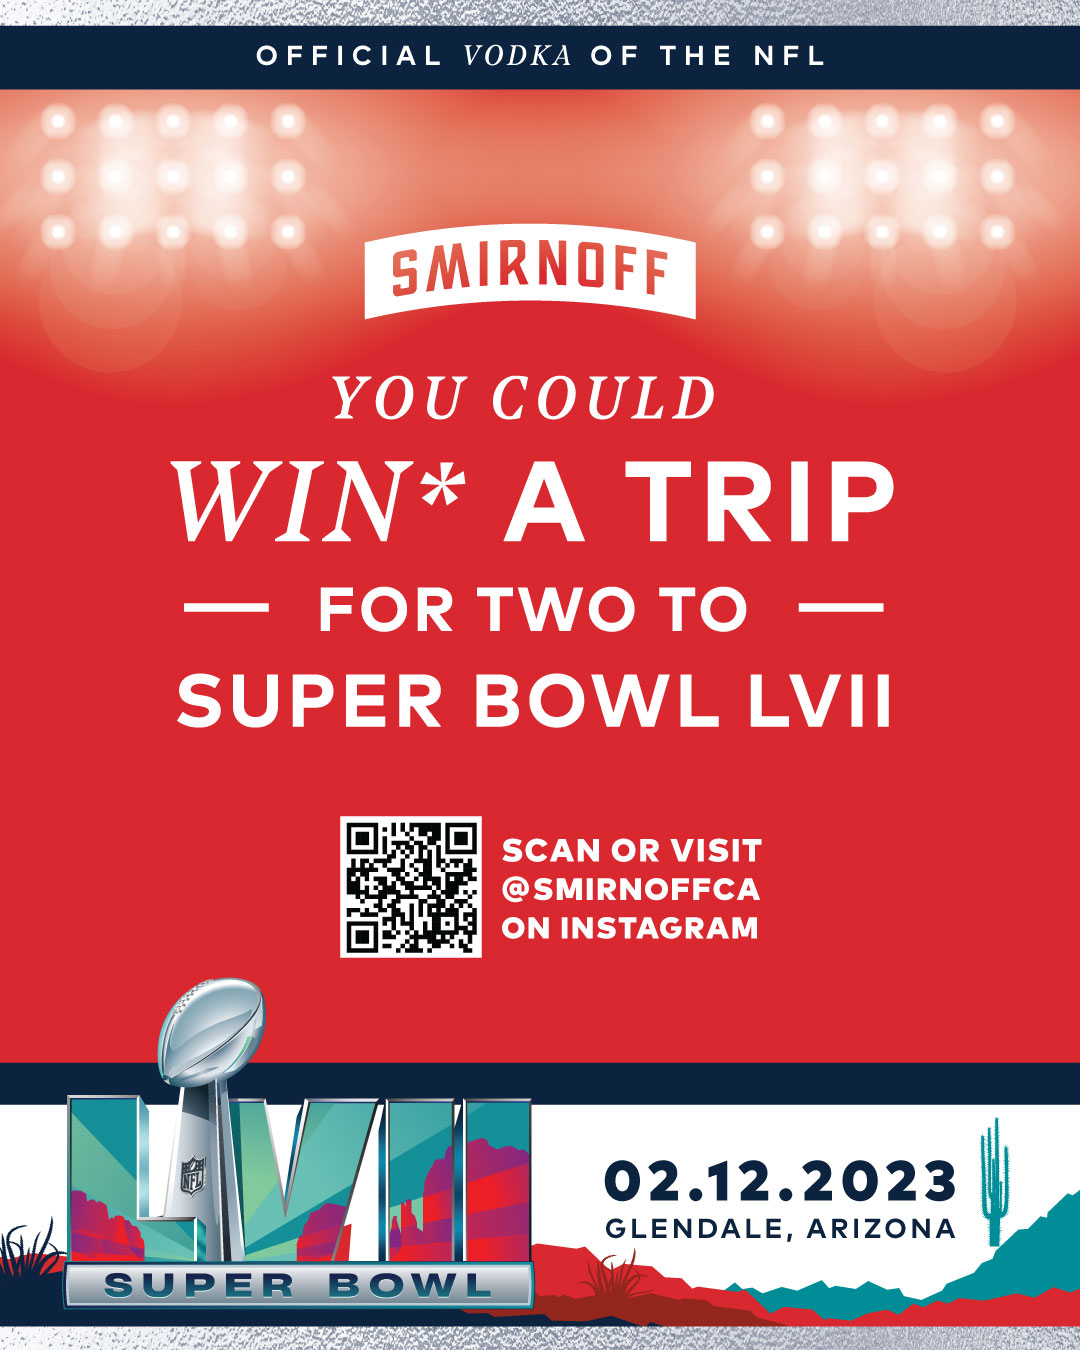 Smirnoff Canada is inviting two lucky Canadians to Super Bowl LVII